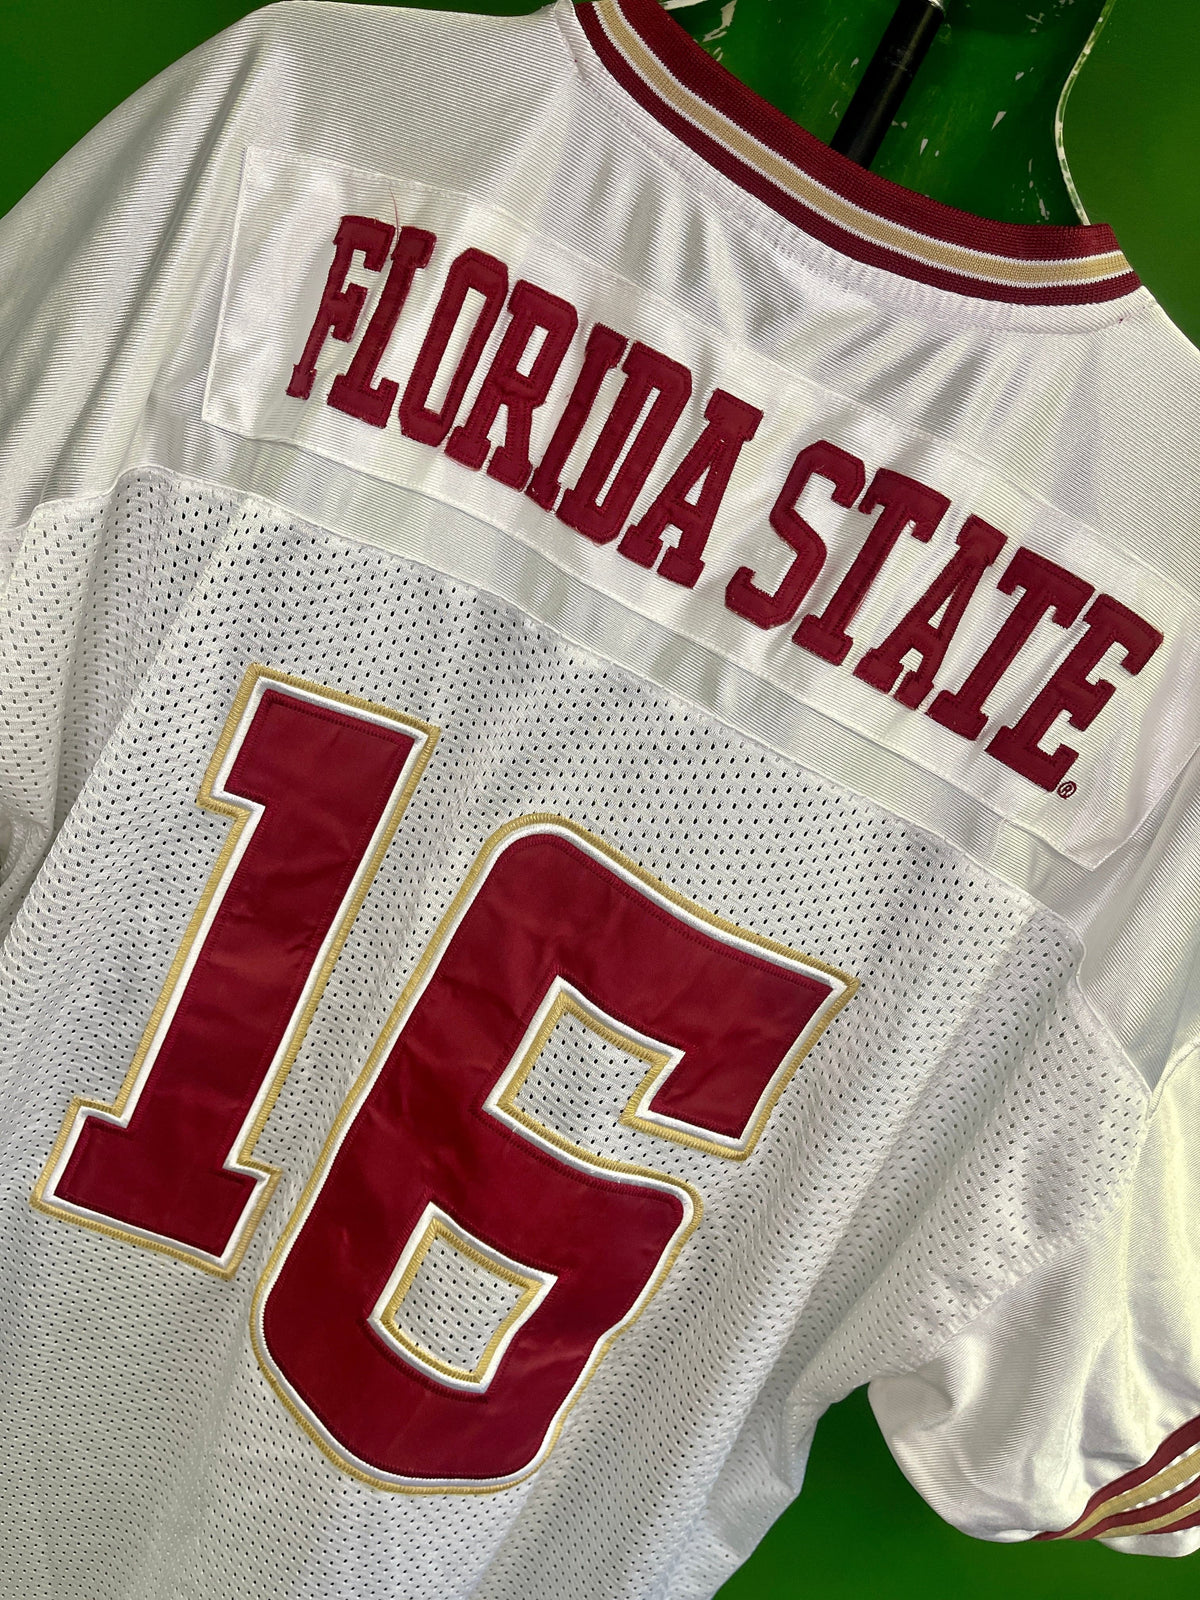 NCAA Florida State Seminoles Colosseum #16 Stitched Mesh Jersey Men's 2X-Large